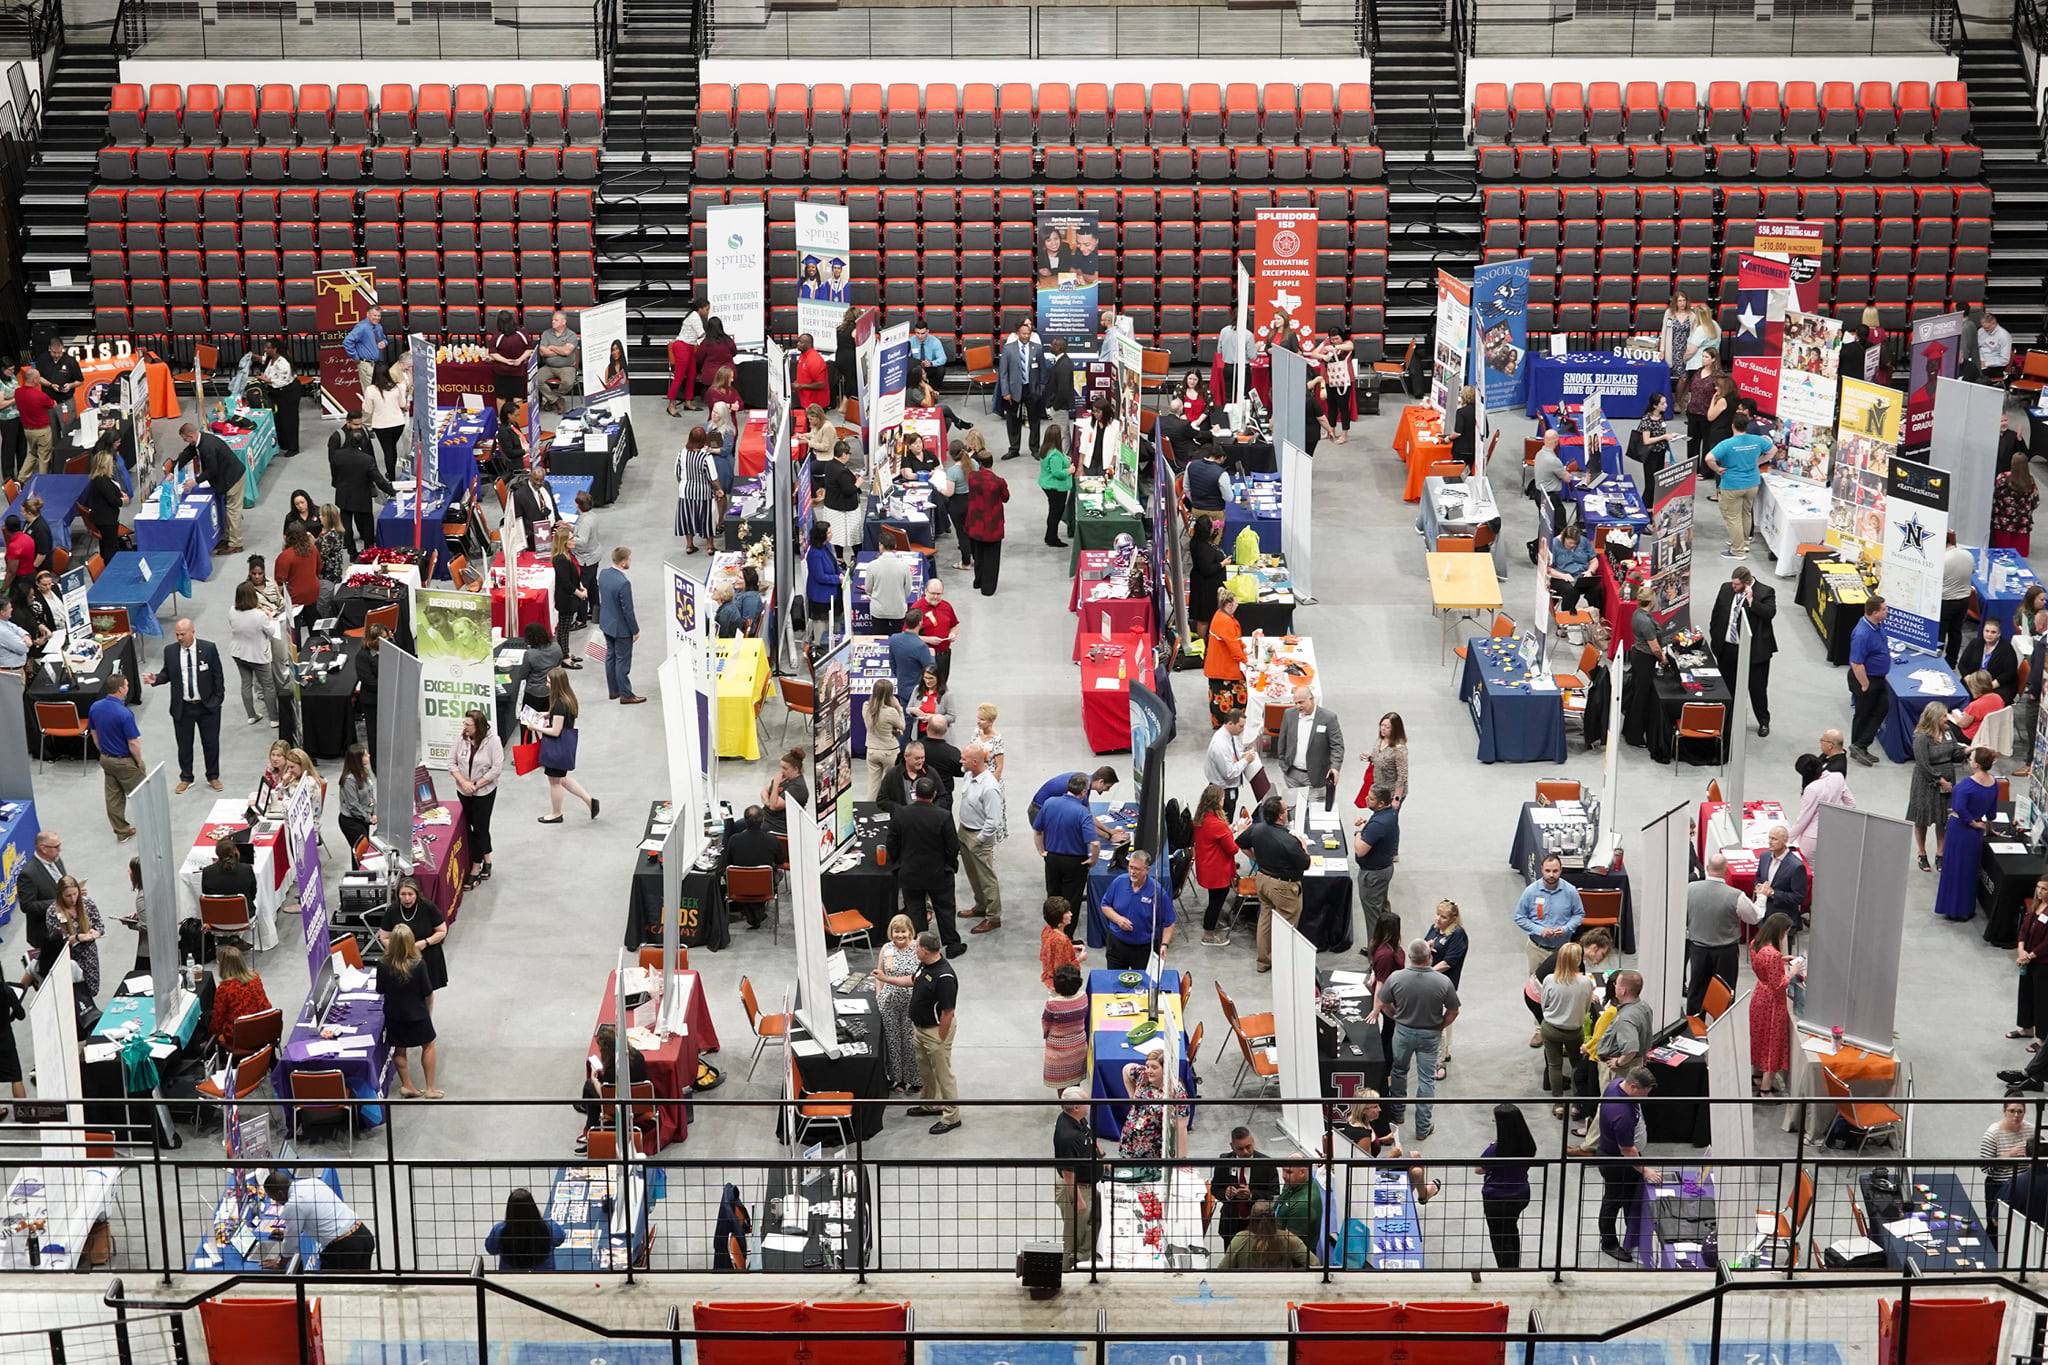 Bearkat teacher candidates recently visited with more 100 school districts across the state to find their dream job at the Spring 2022 Teacher Career Fair